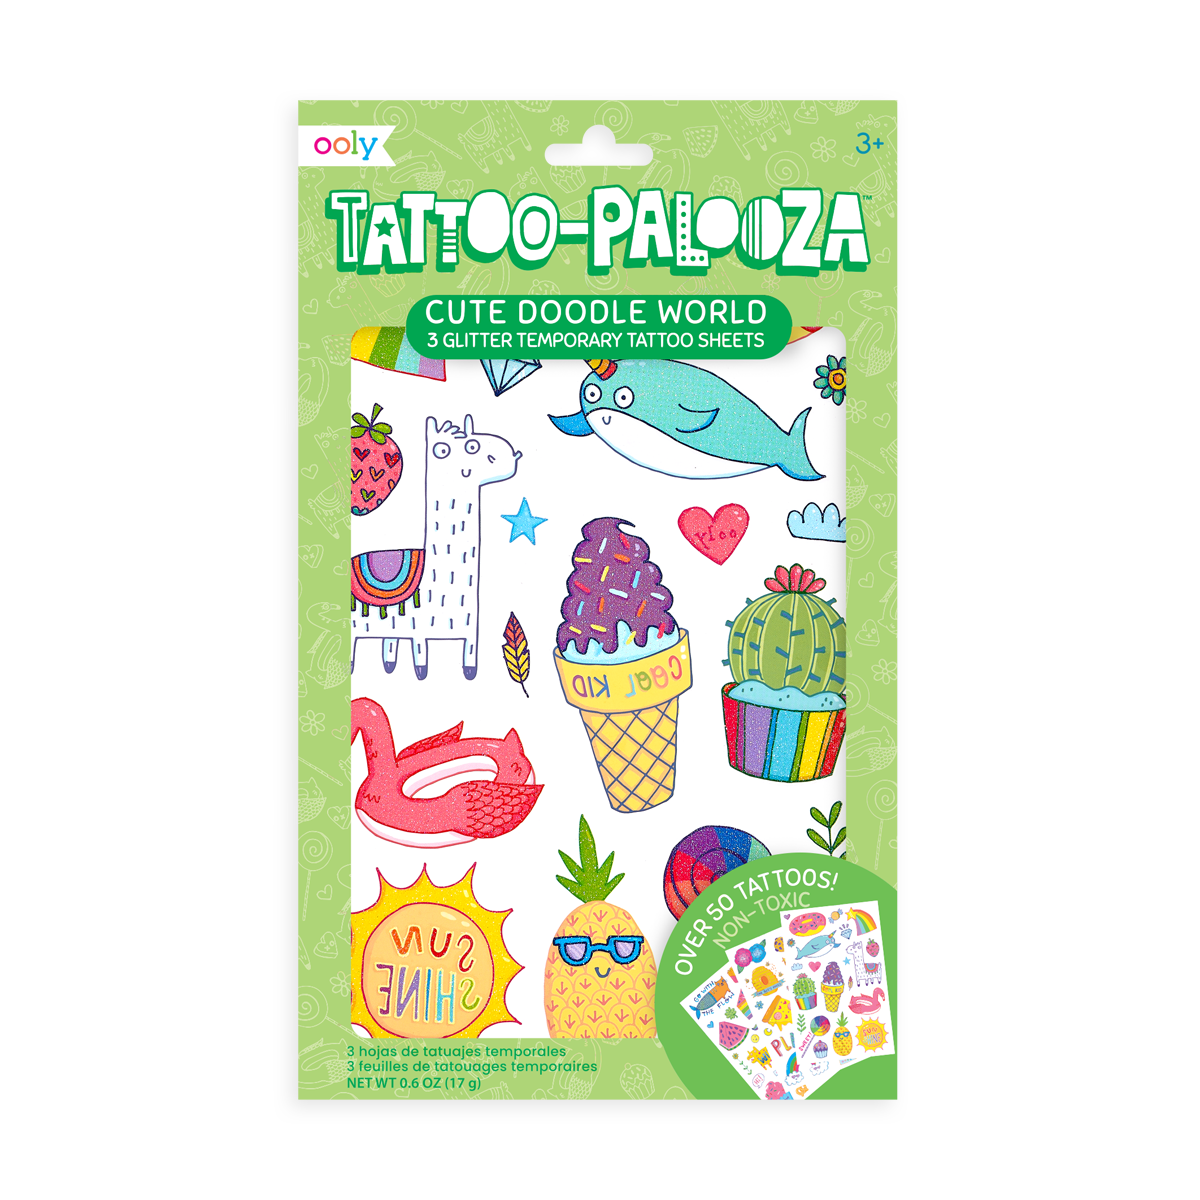 Tattoo-Palooza Temporary Tattoos - Cute Doodle World - in packaging.